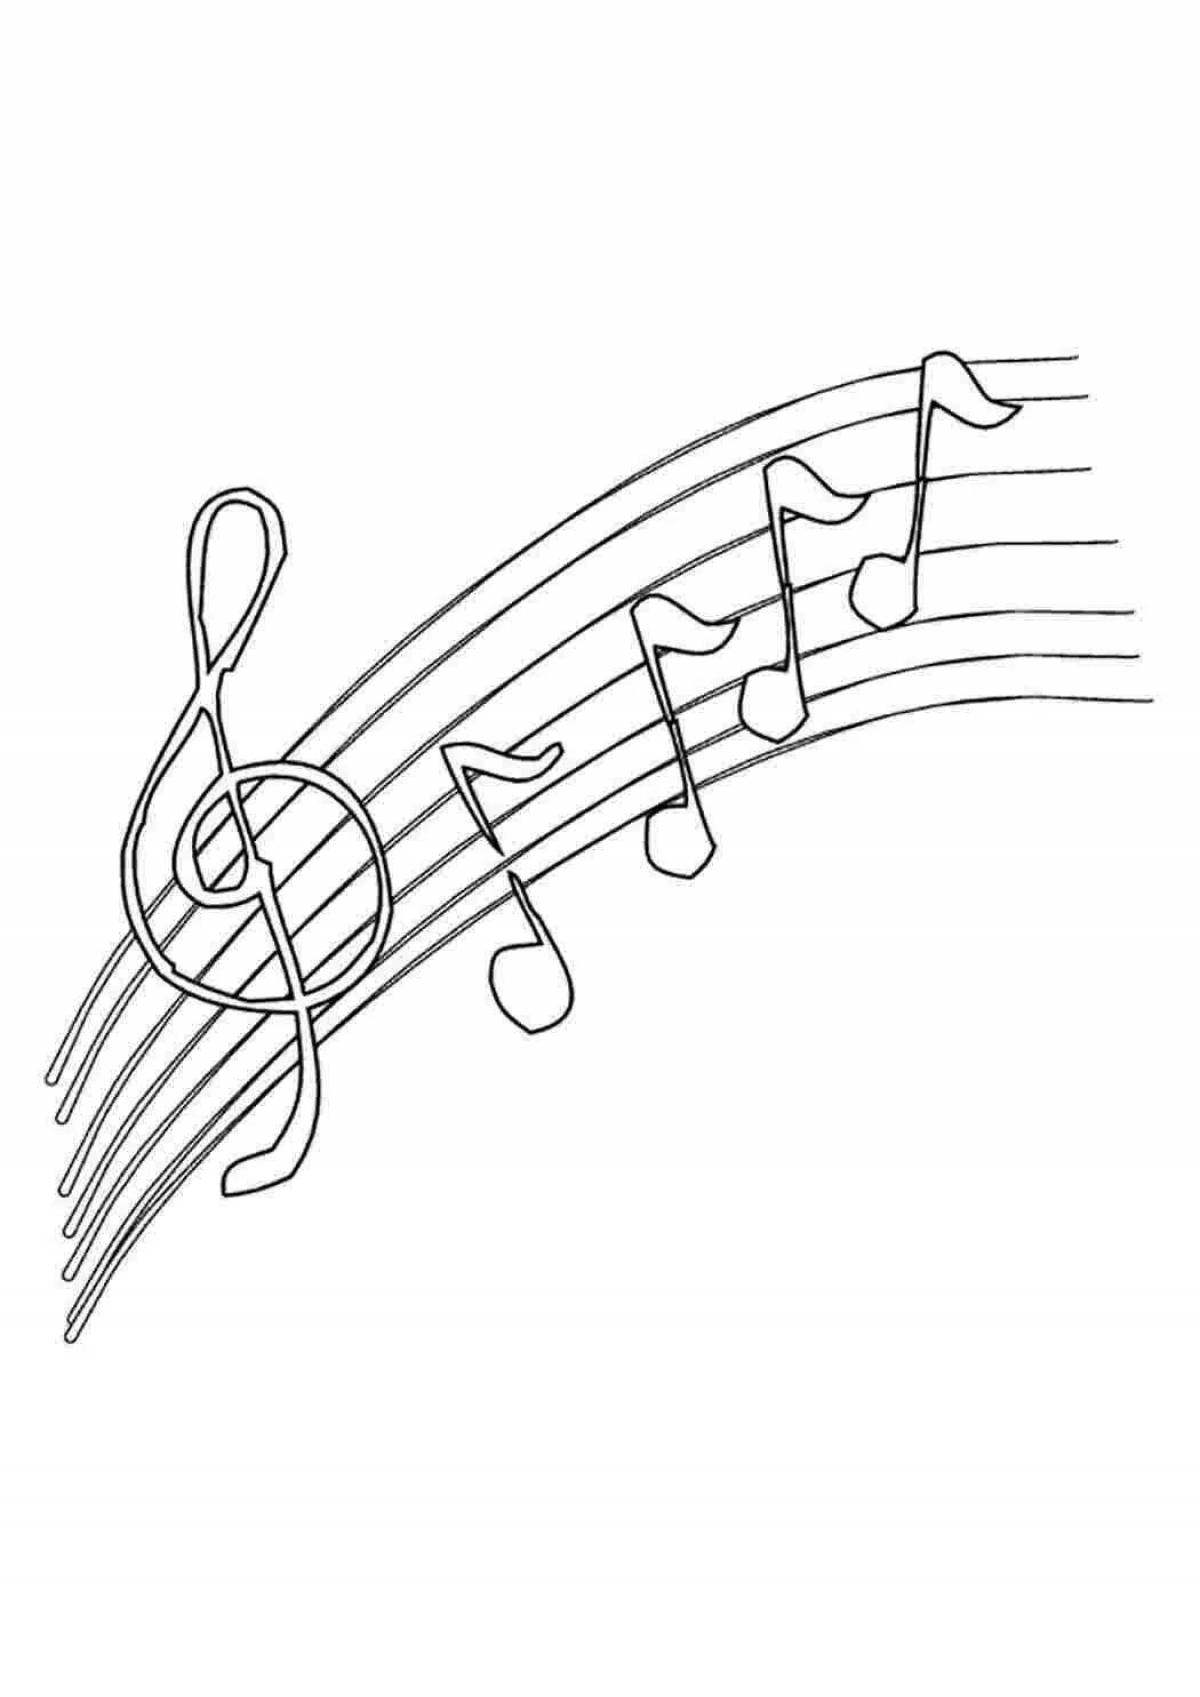 Coloring page charming musical note